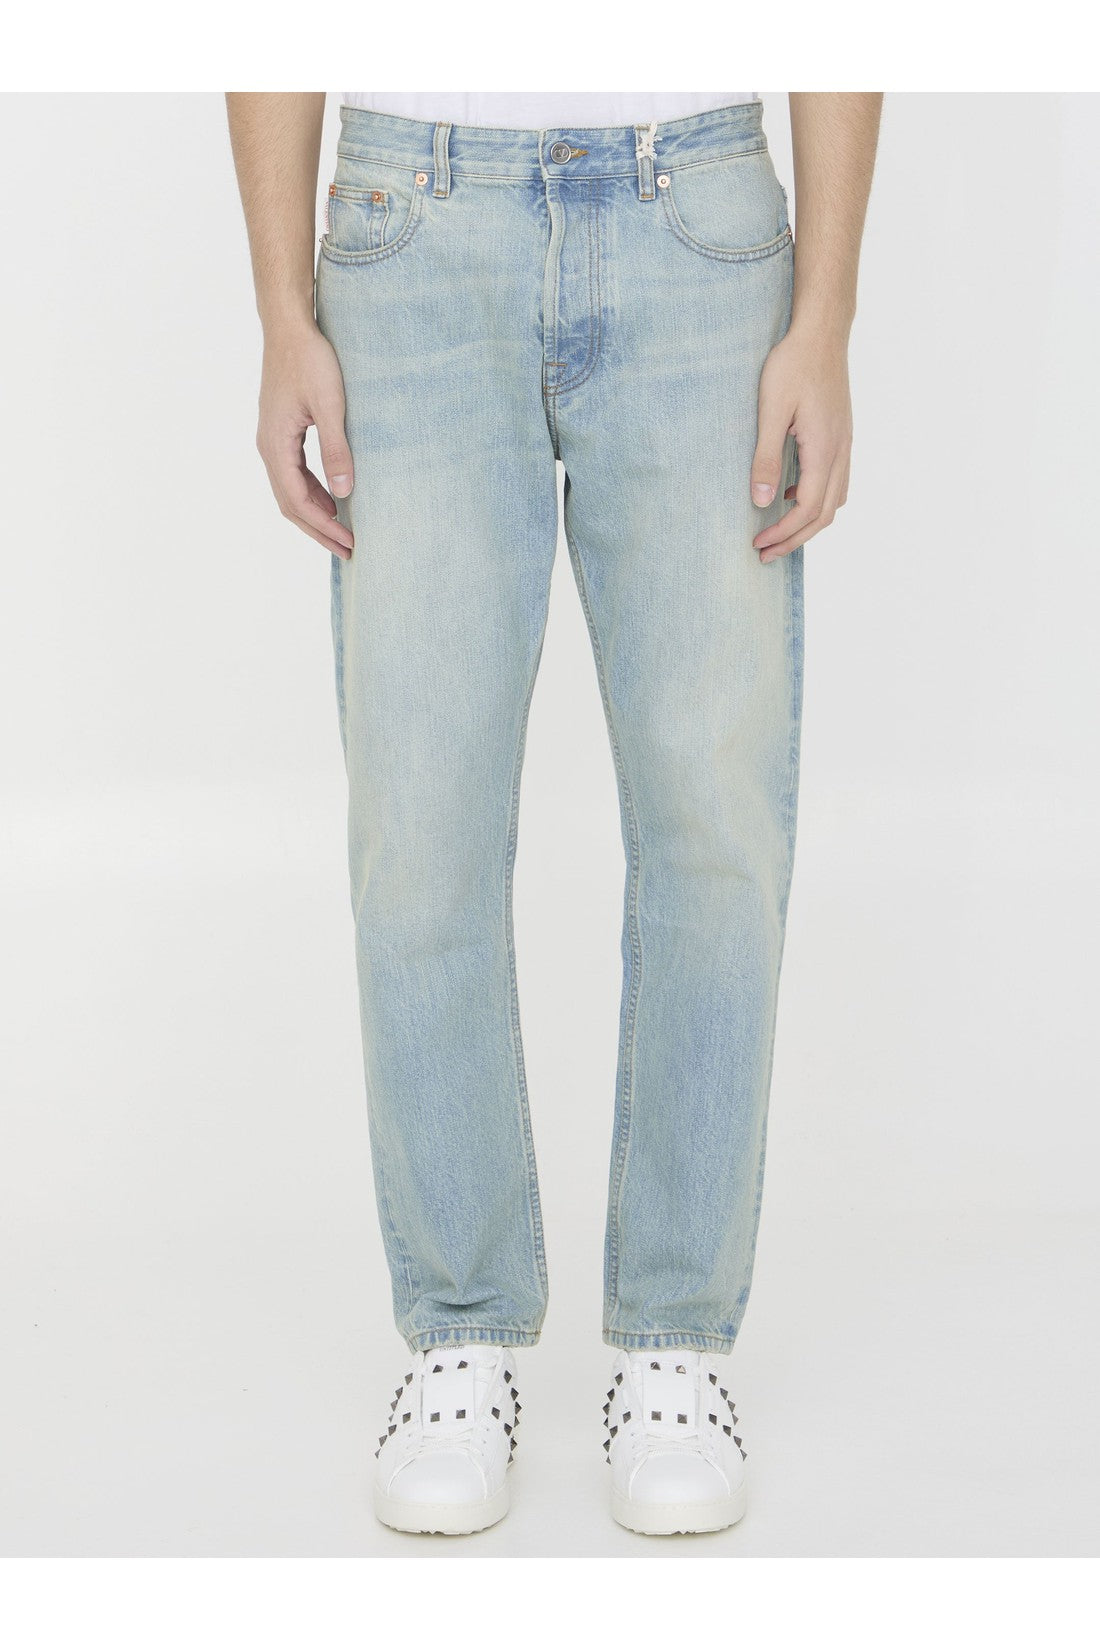 Jeans with VLogo Signature